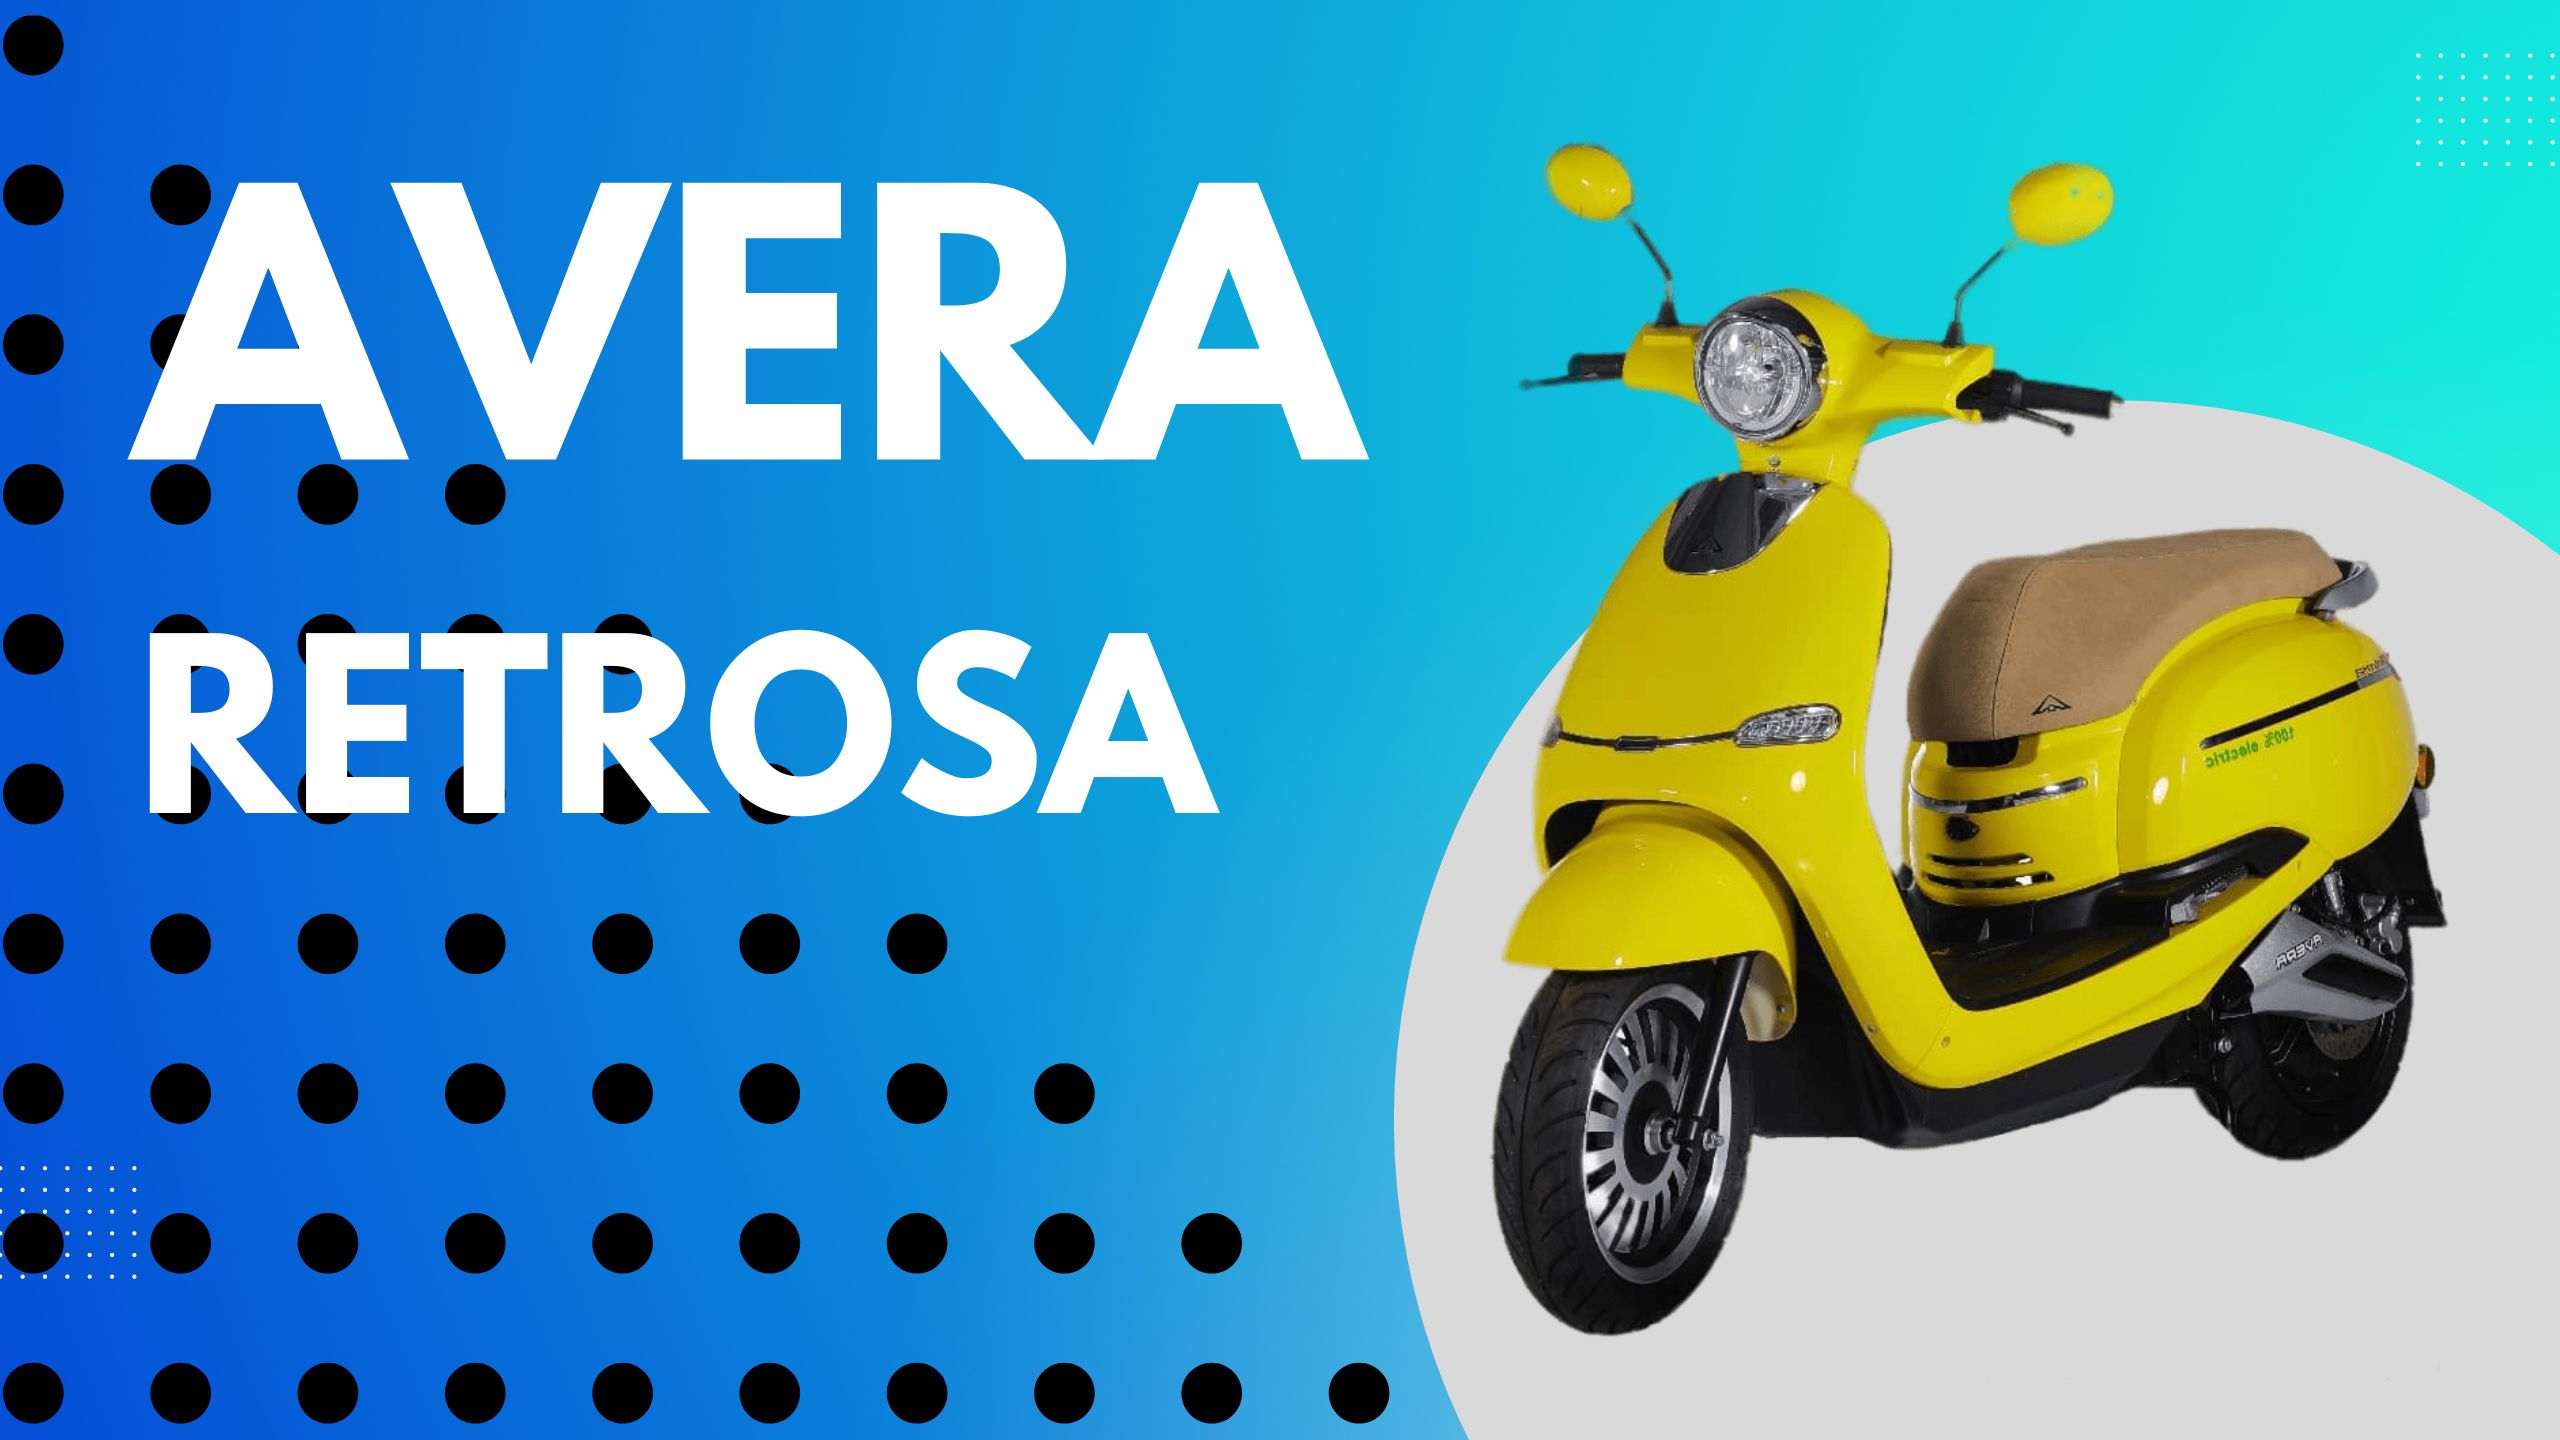 AVERA is Coming Soon. Stay Tuned!